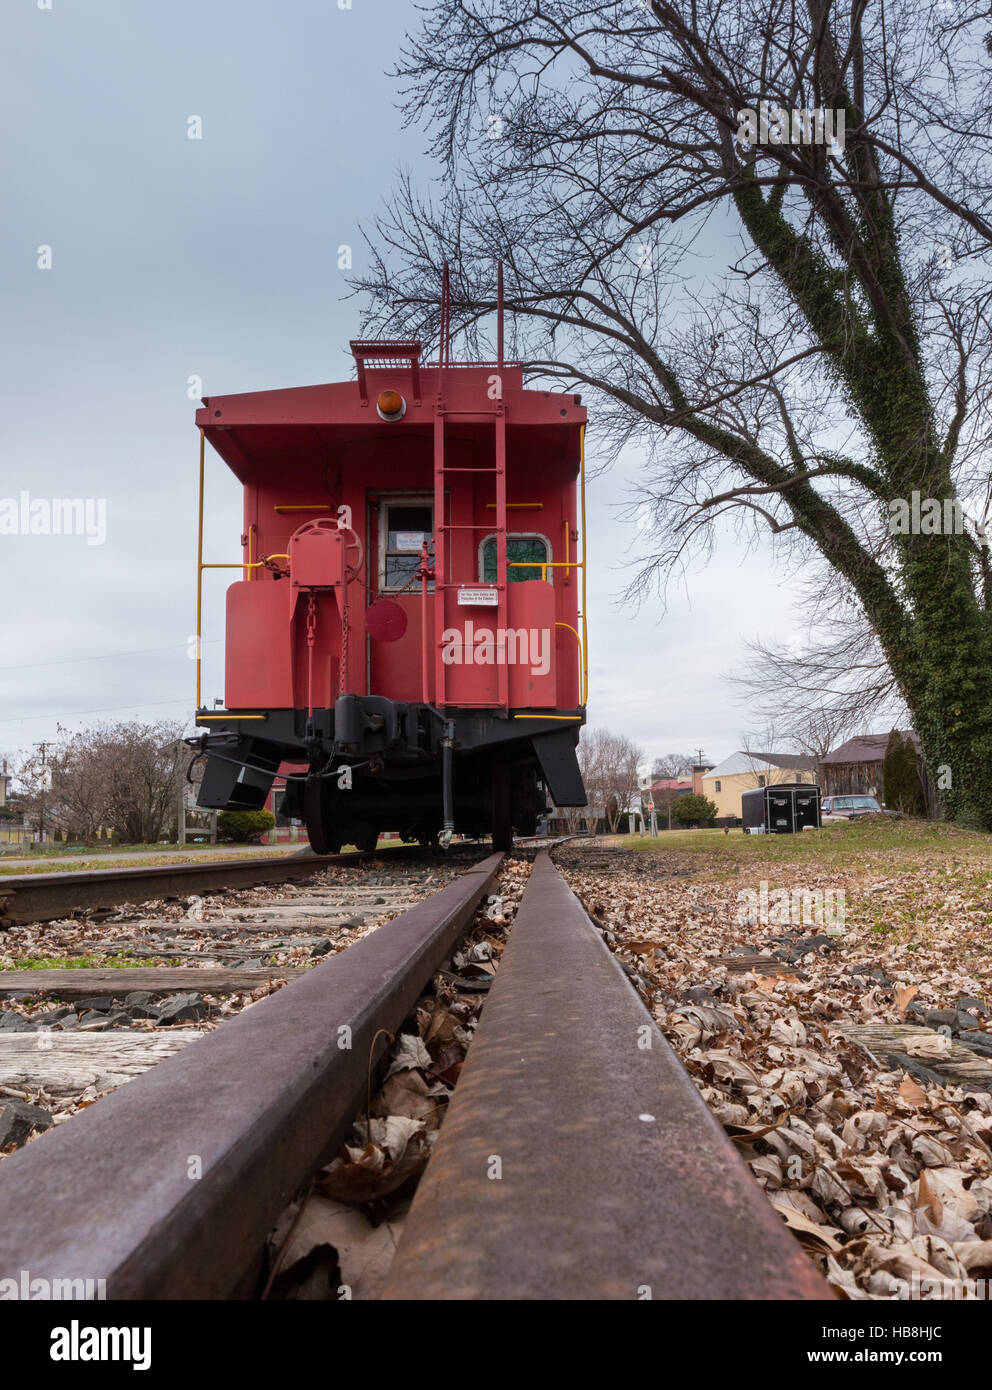 Old red caboose with train track Stock Photo